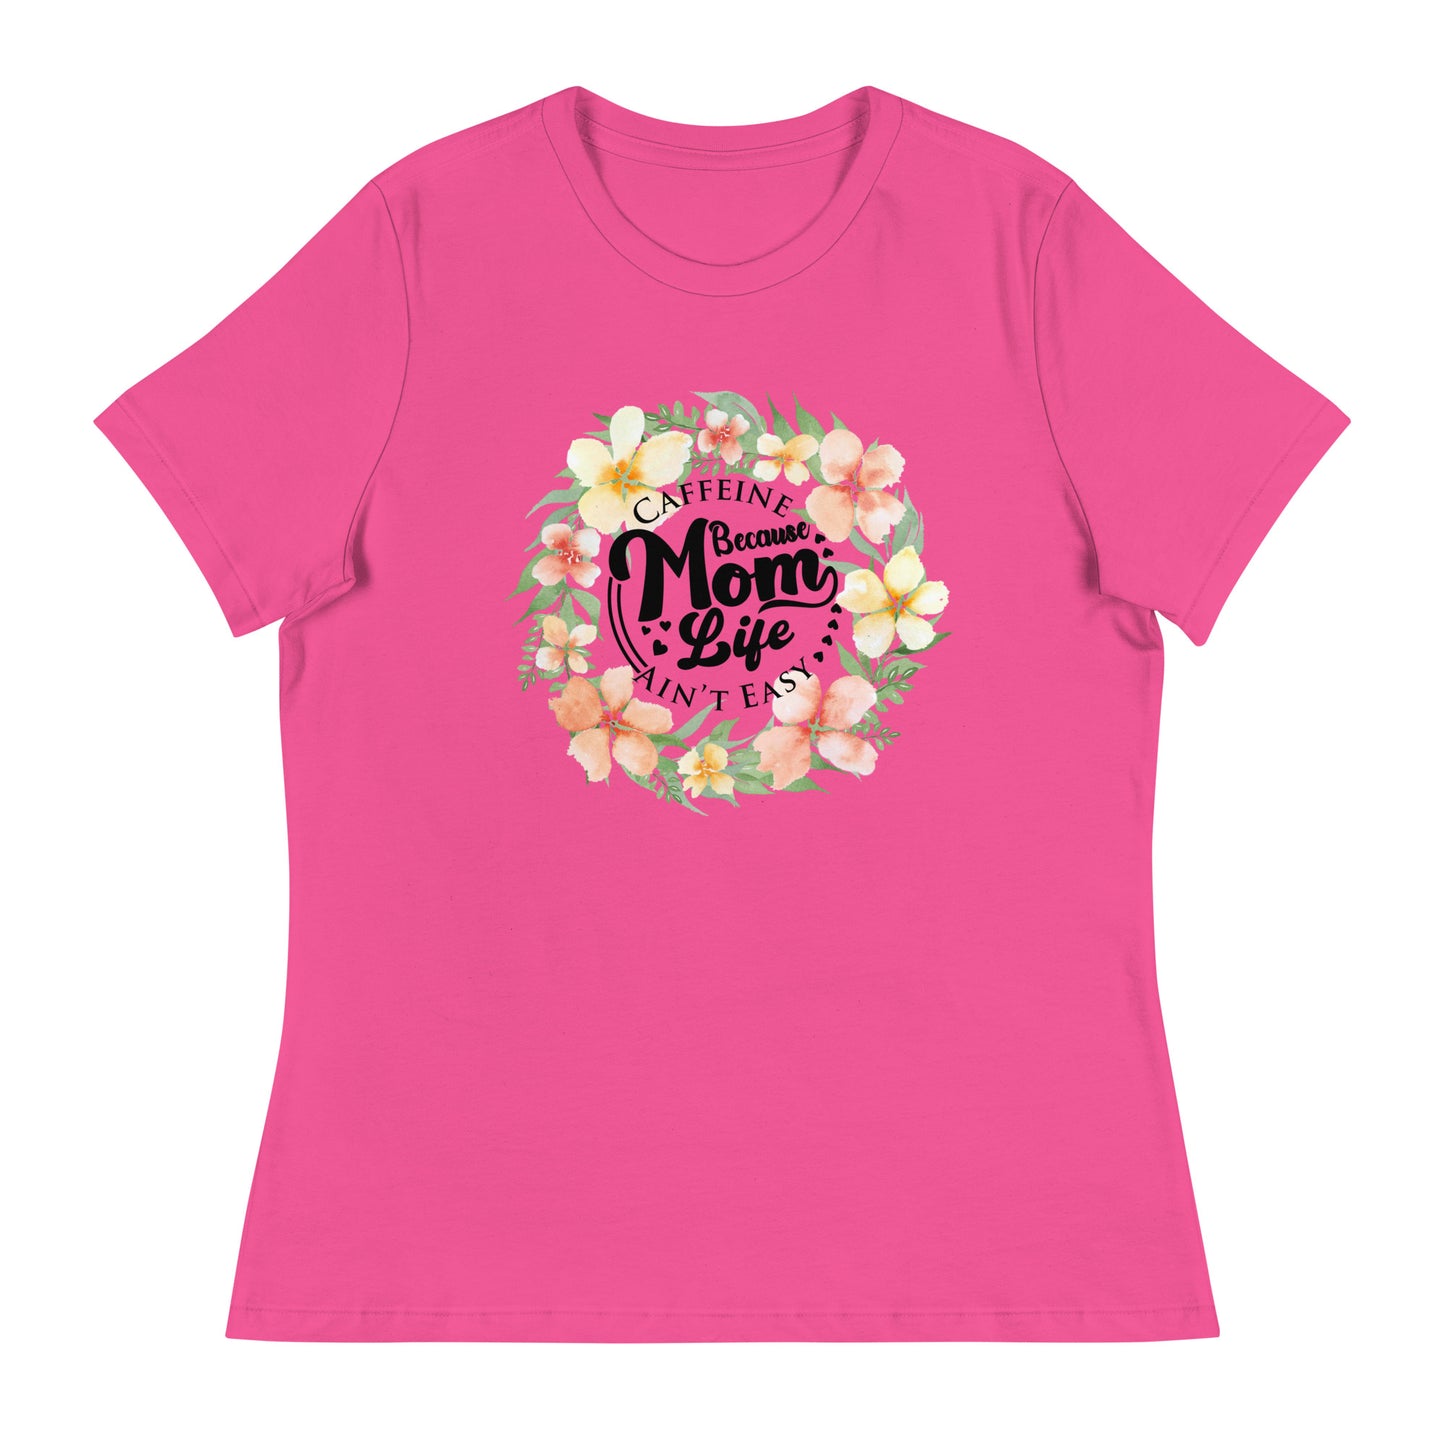 Caffein because mom life is not easyWomen's Relaxed T-Shirt